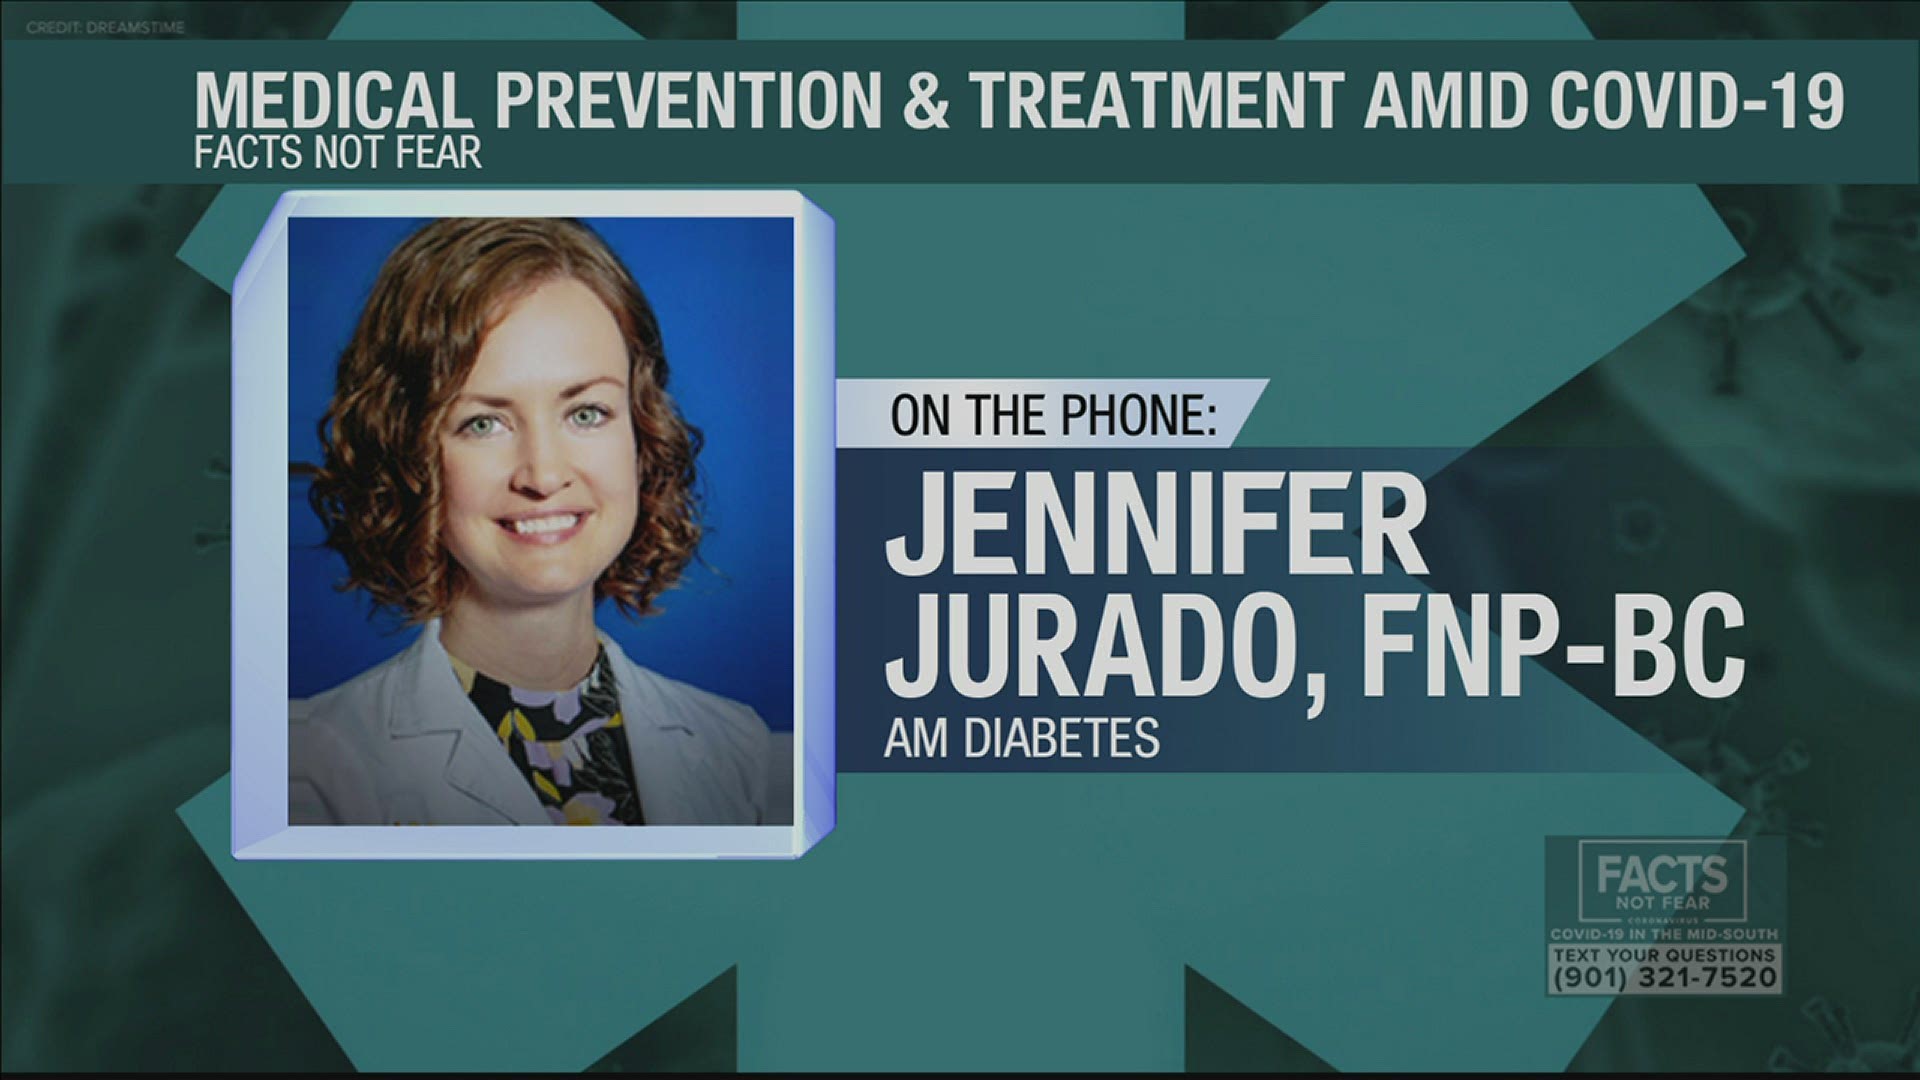 Jennifer Jurado, FNP-BC discusses medical treatment and prevention during COVID-19.